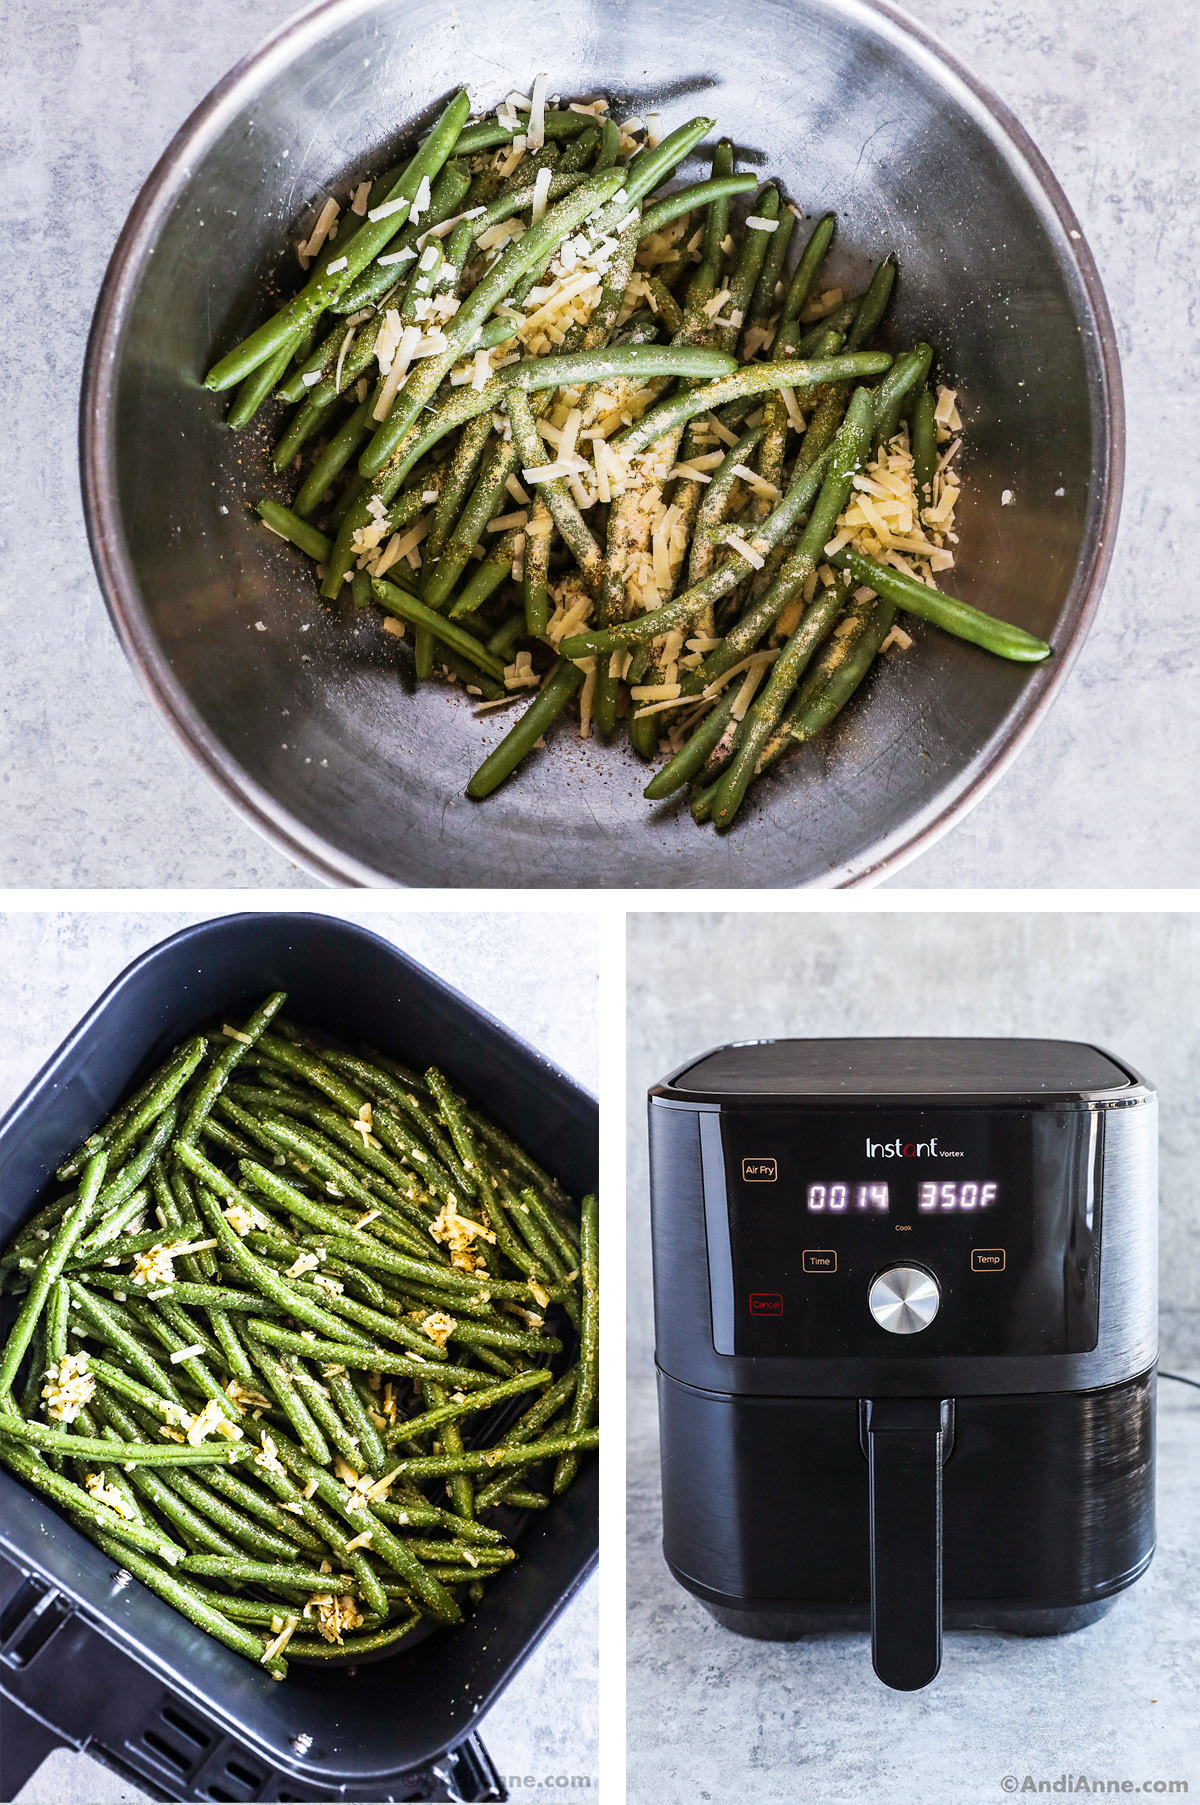 Three images, first is green beans with parmesan, oil, and spices in a large silver bowl. Second is an air fryer basket with seasoned green beans inside, third is an air fryer with temperature of 350F and 14 mins.